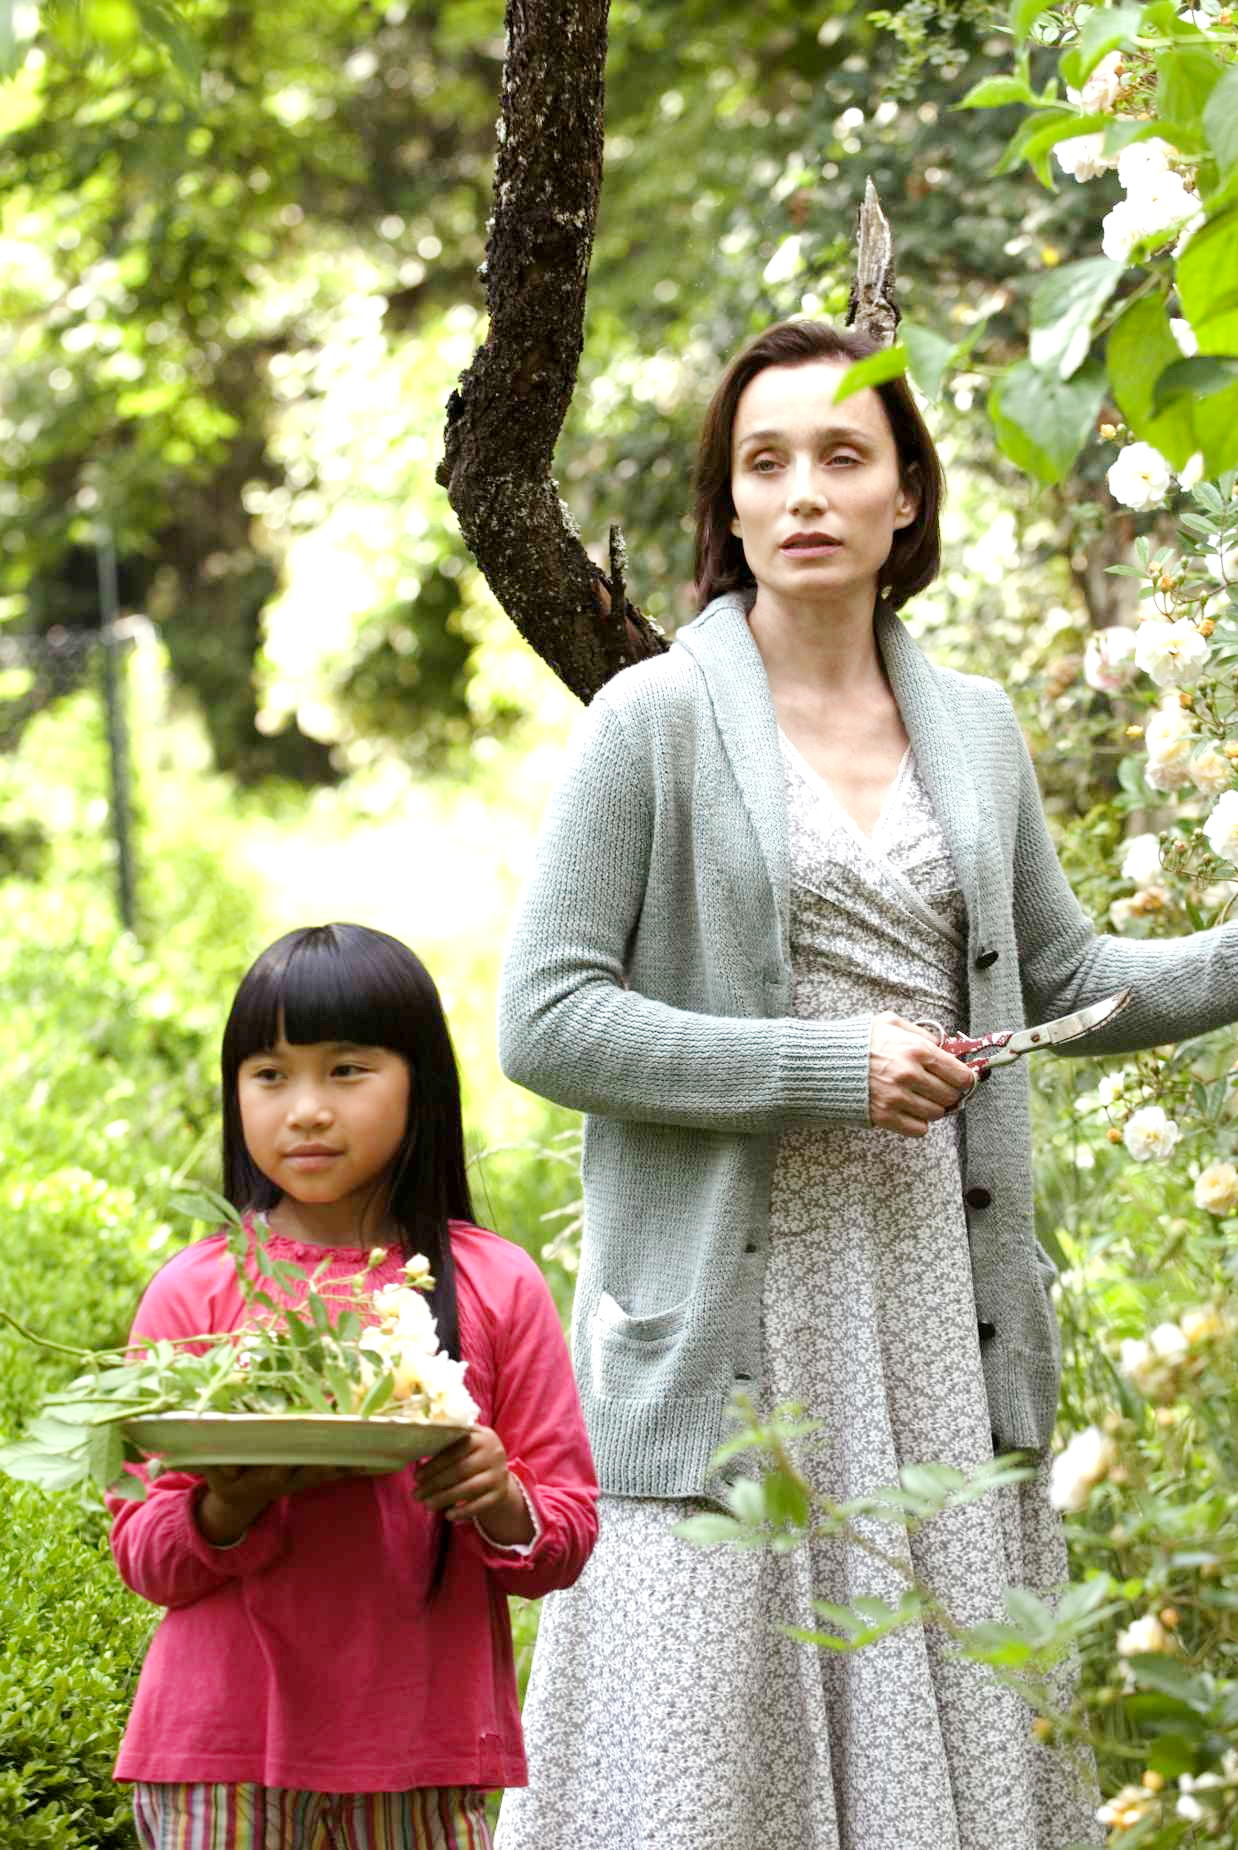 Lise Segur stars as P'tit Lys and Kristin Scott Thomas stars as Juliette Fontaine in Sony Pictures Classics' I've Loved You So Long (2008). Photo credit by Thierry Valletoux.